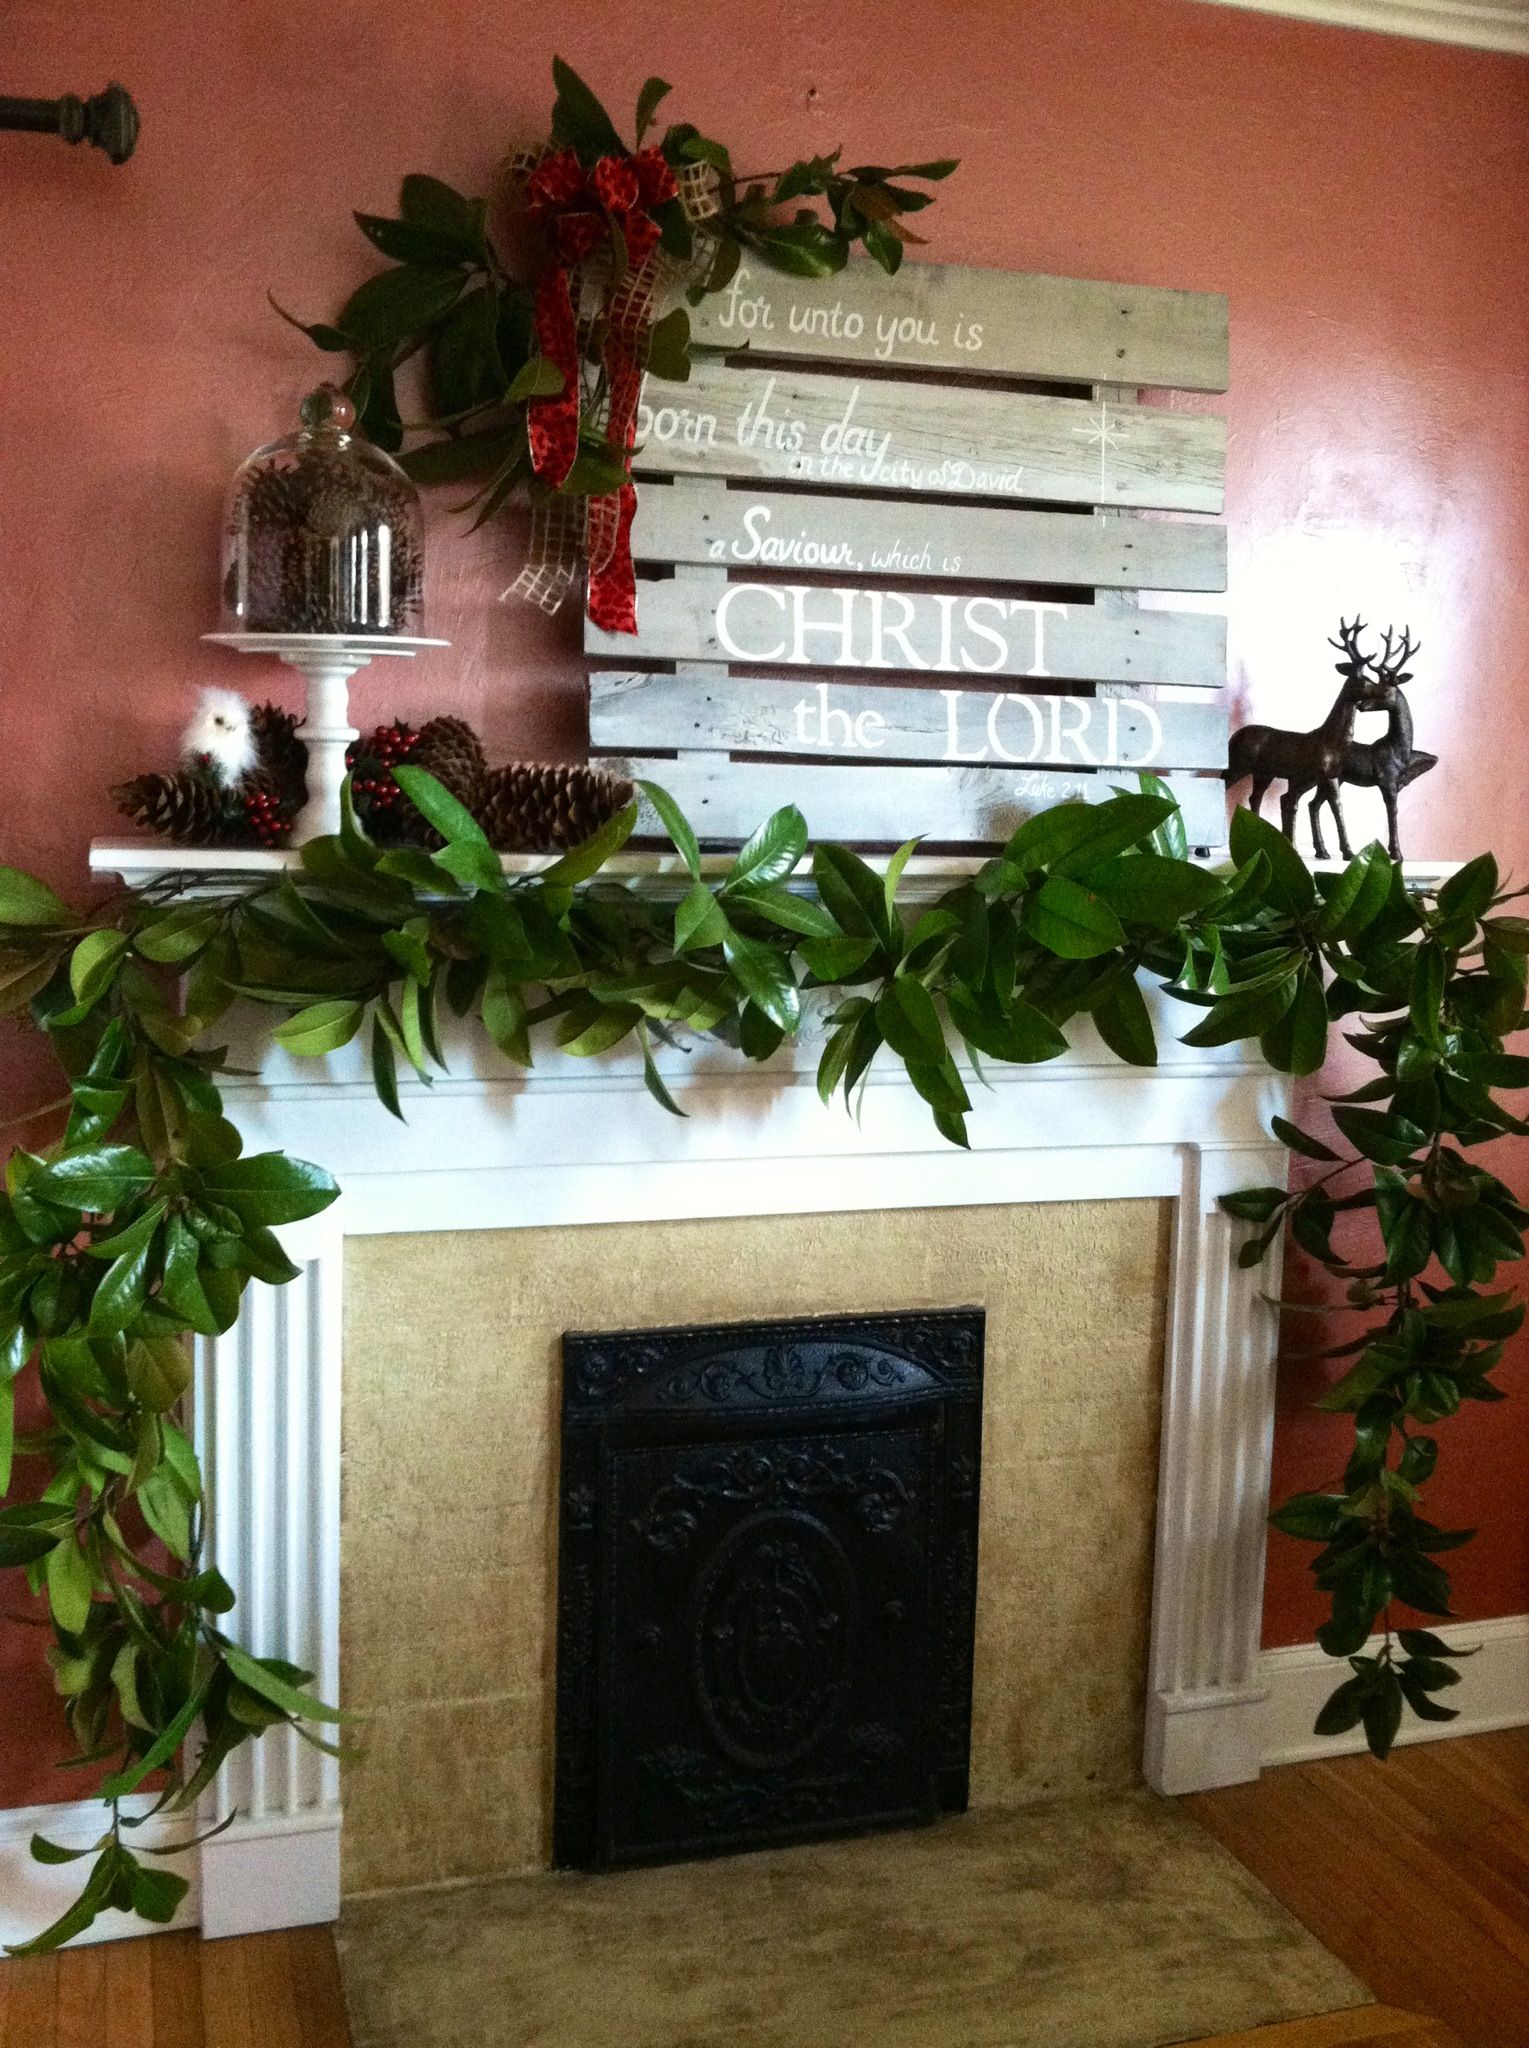 Garland for Fireplace Mantel Elegant Mantle Decked W Magnolia Garland for Christmas